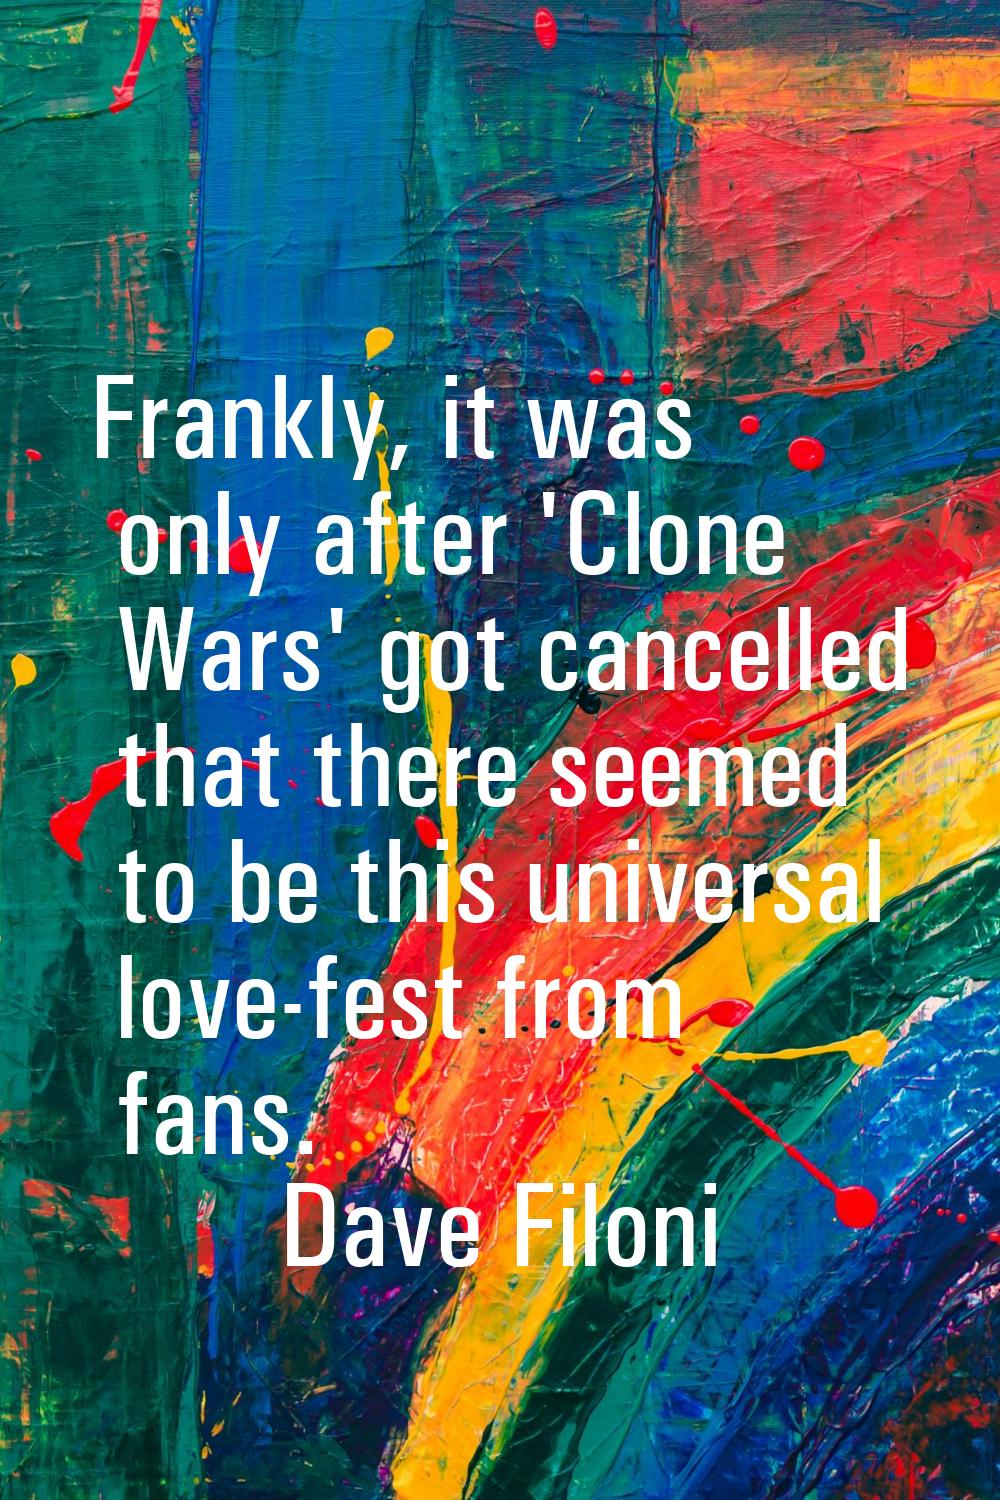 Frankly, it was only after 'Clone Wars' got cancelled that there seemed to be this universal love-f